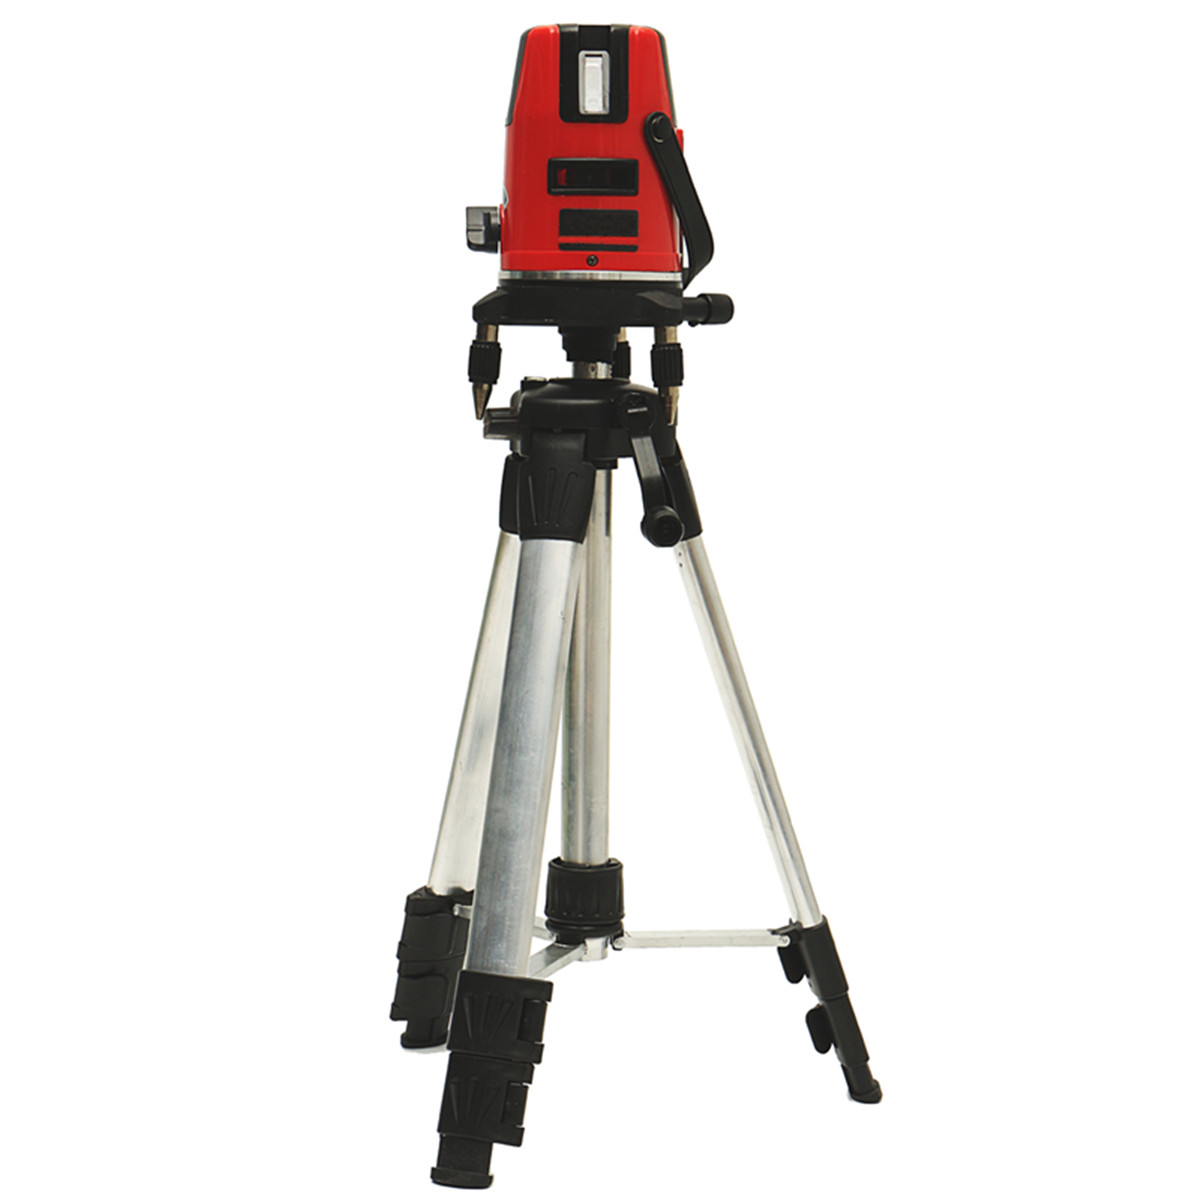 5-Lines-6-Points-Professional-Waterproof-Laser-Level-Red-Automatic-Level-360deg-Rotating-Outdoor-Mod-1133550